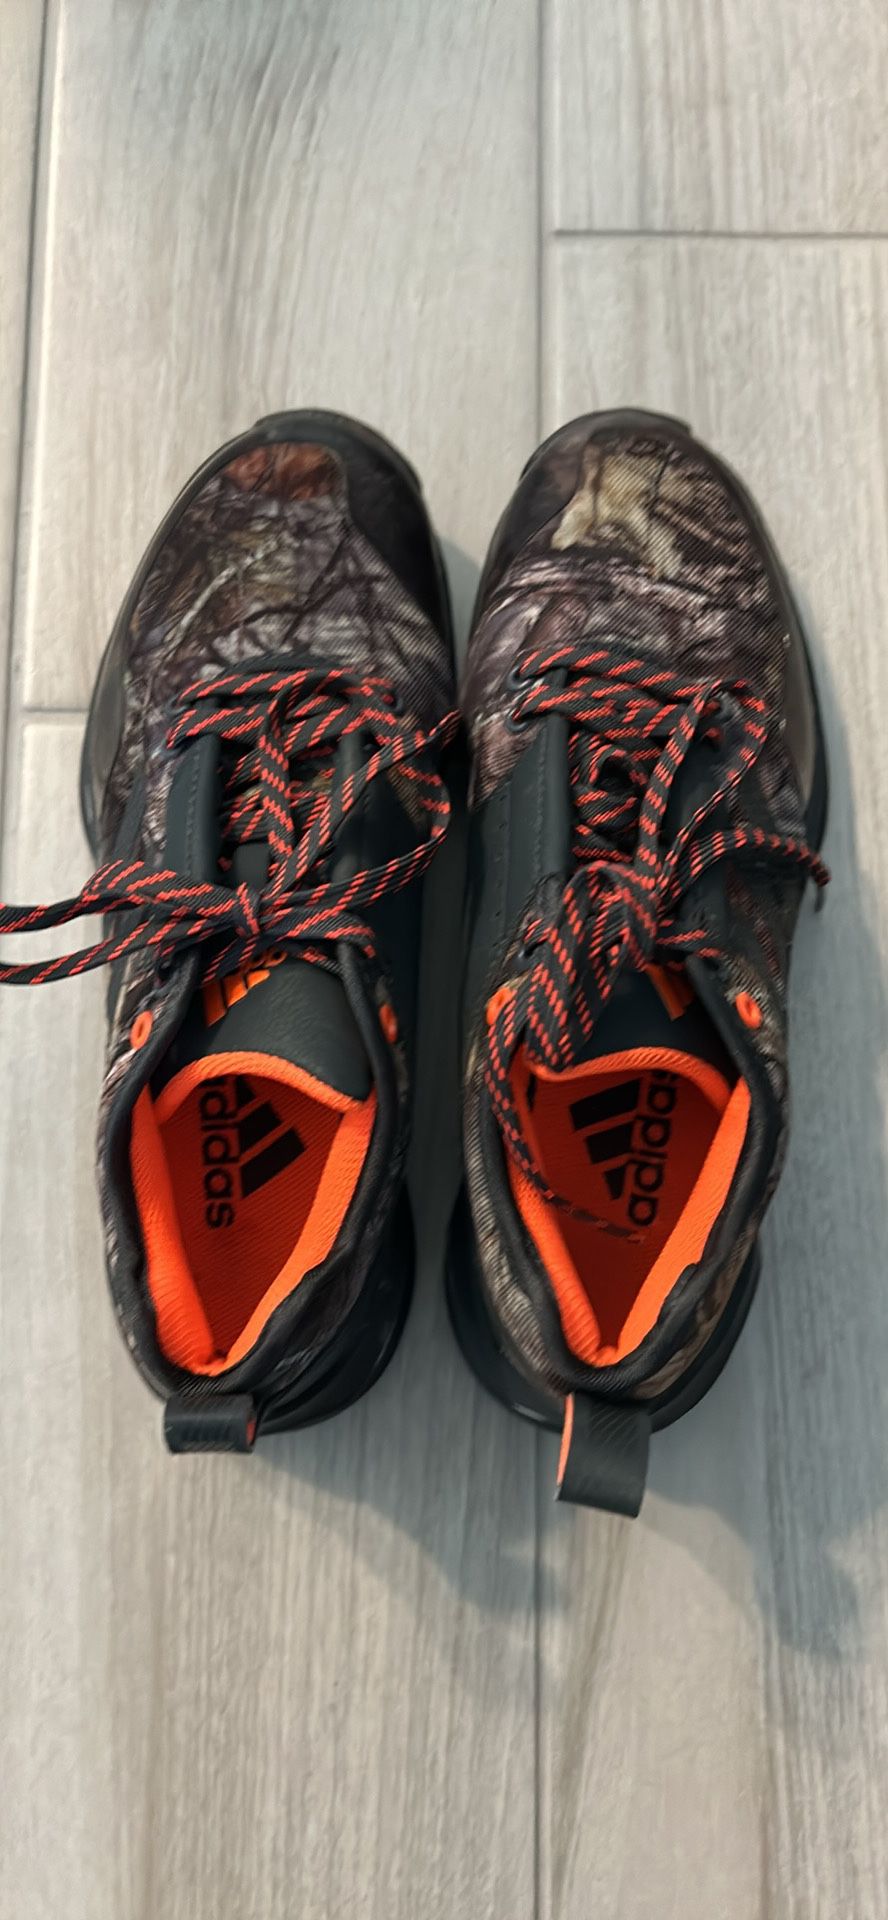 ADIDAS CAMOUFLAGE SNEAKERS 